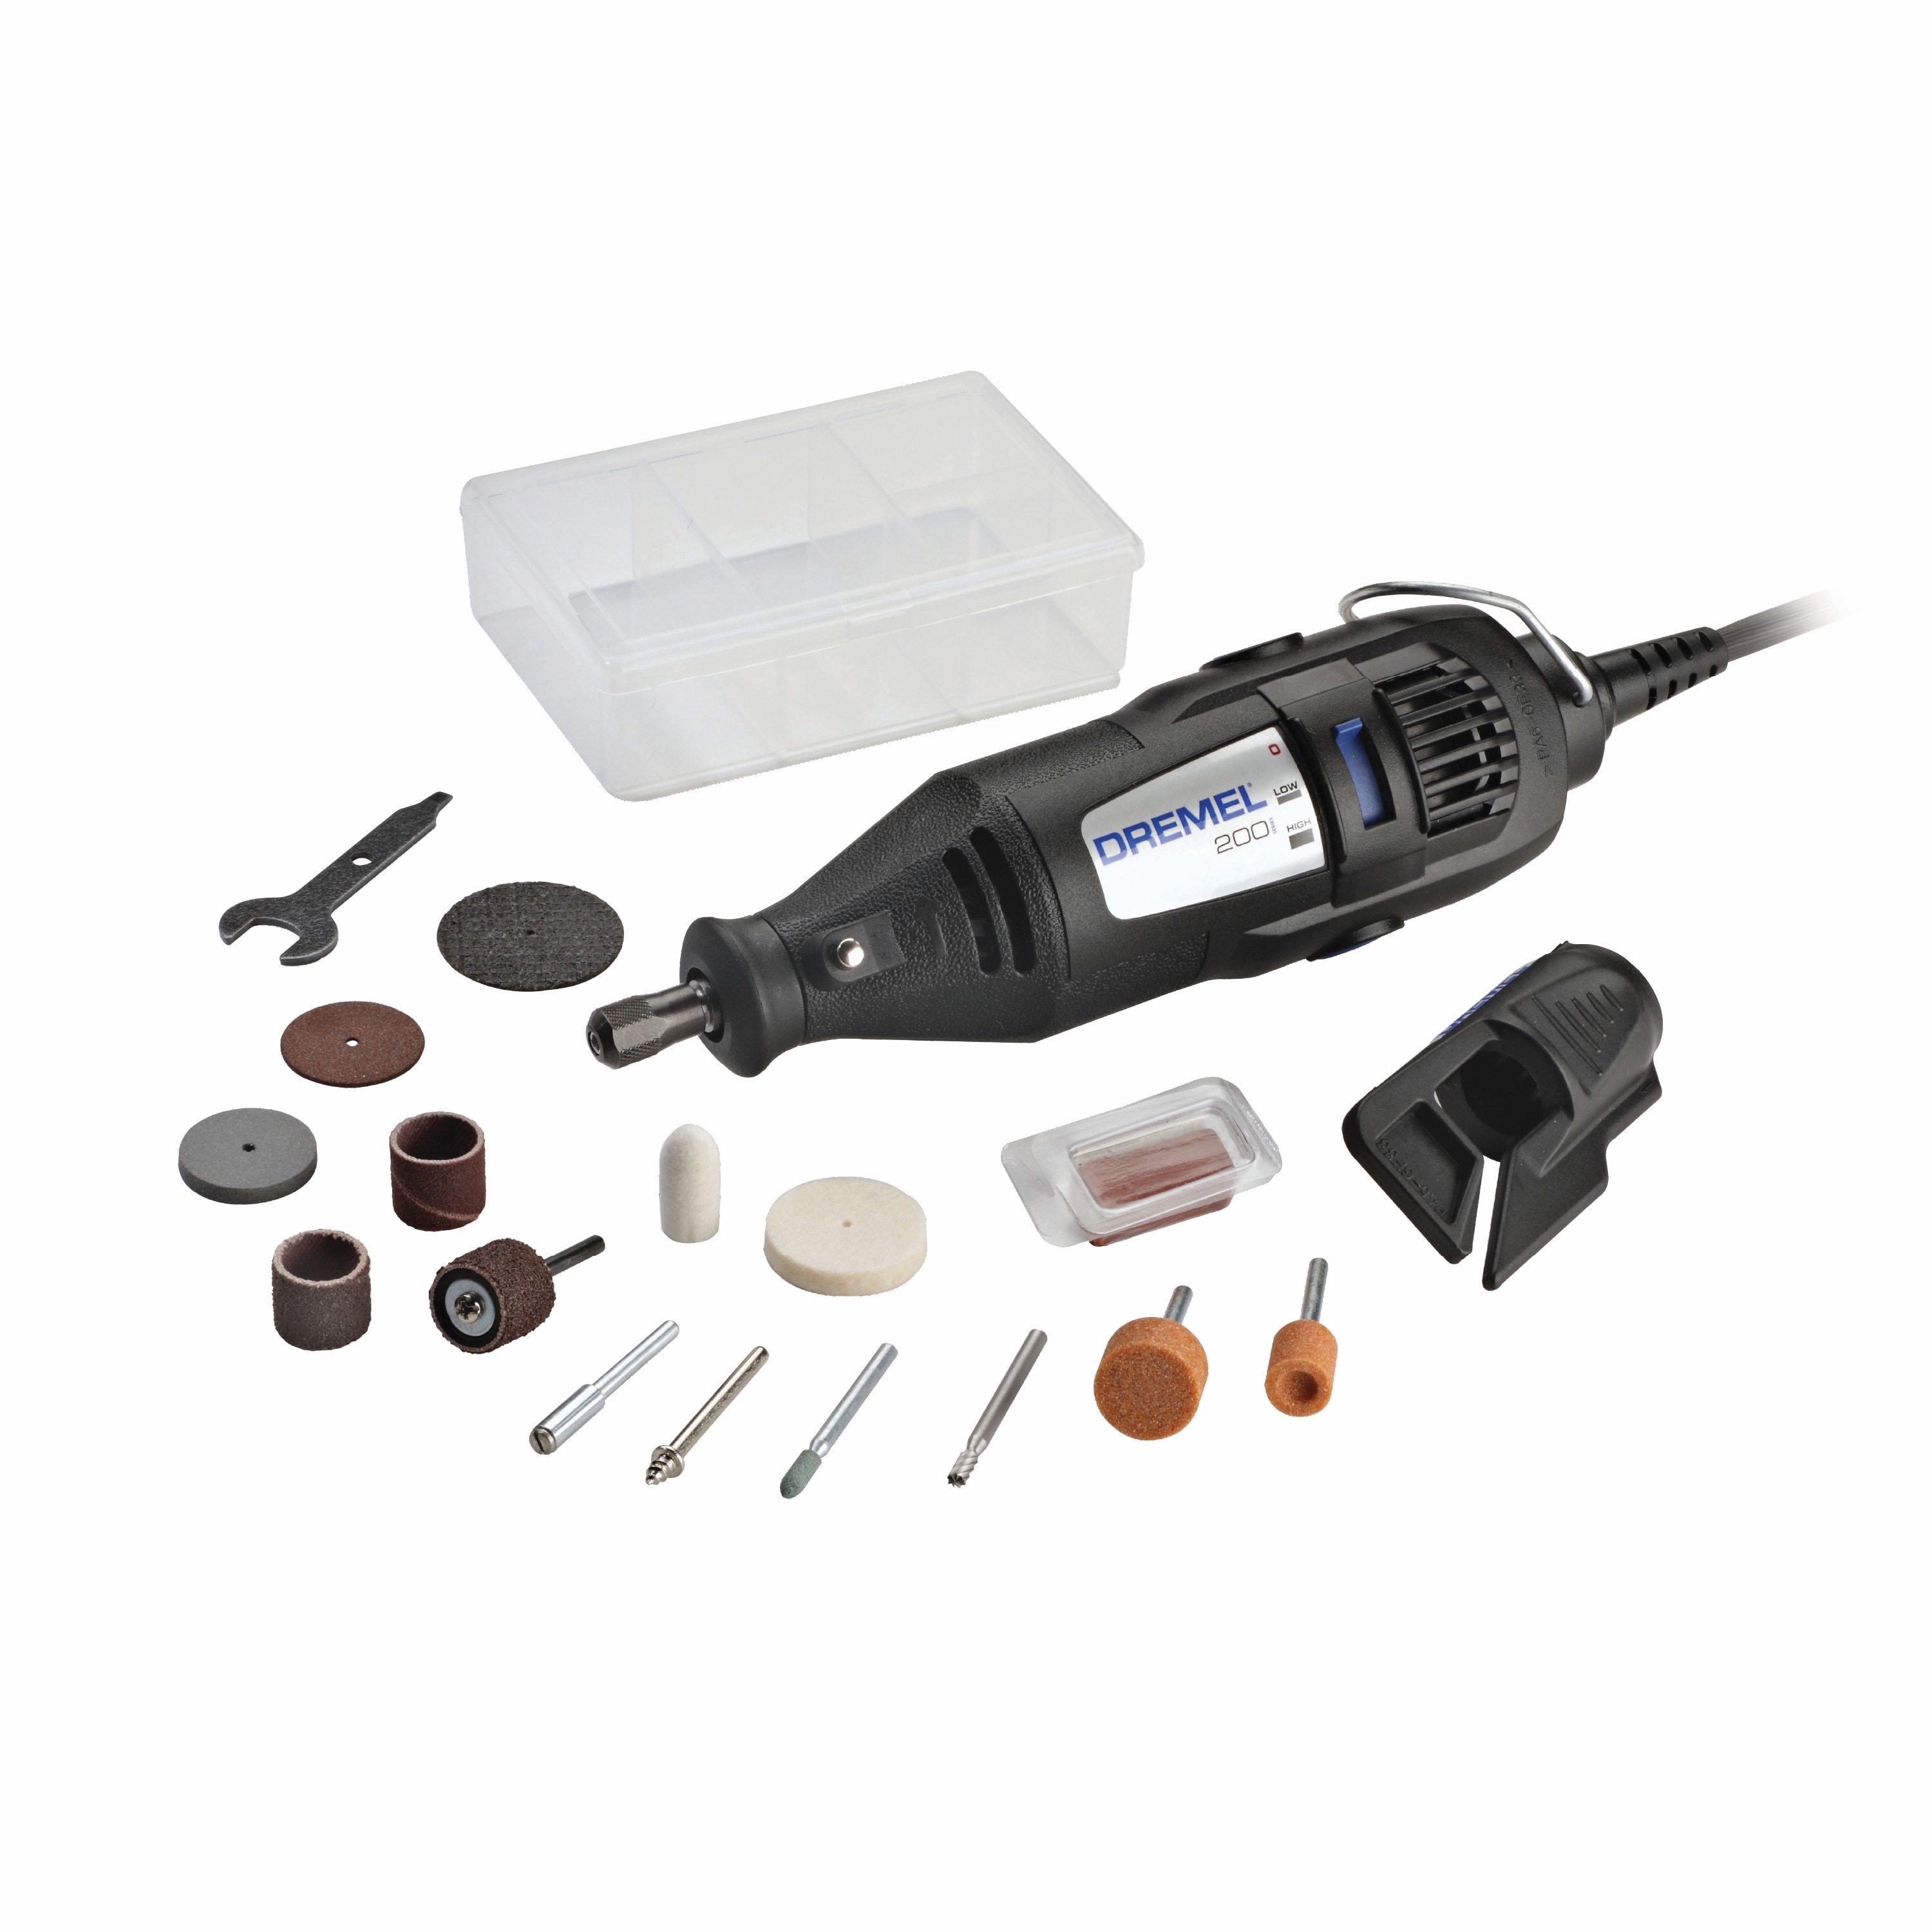 Dremel 3000 10/26 Variable Speed Angle Grinde Rotary Tool Multi Power Tools  Kit Sander Engraver for Metal Cutting Wood Carving